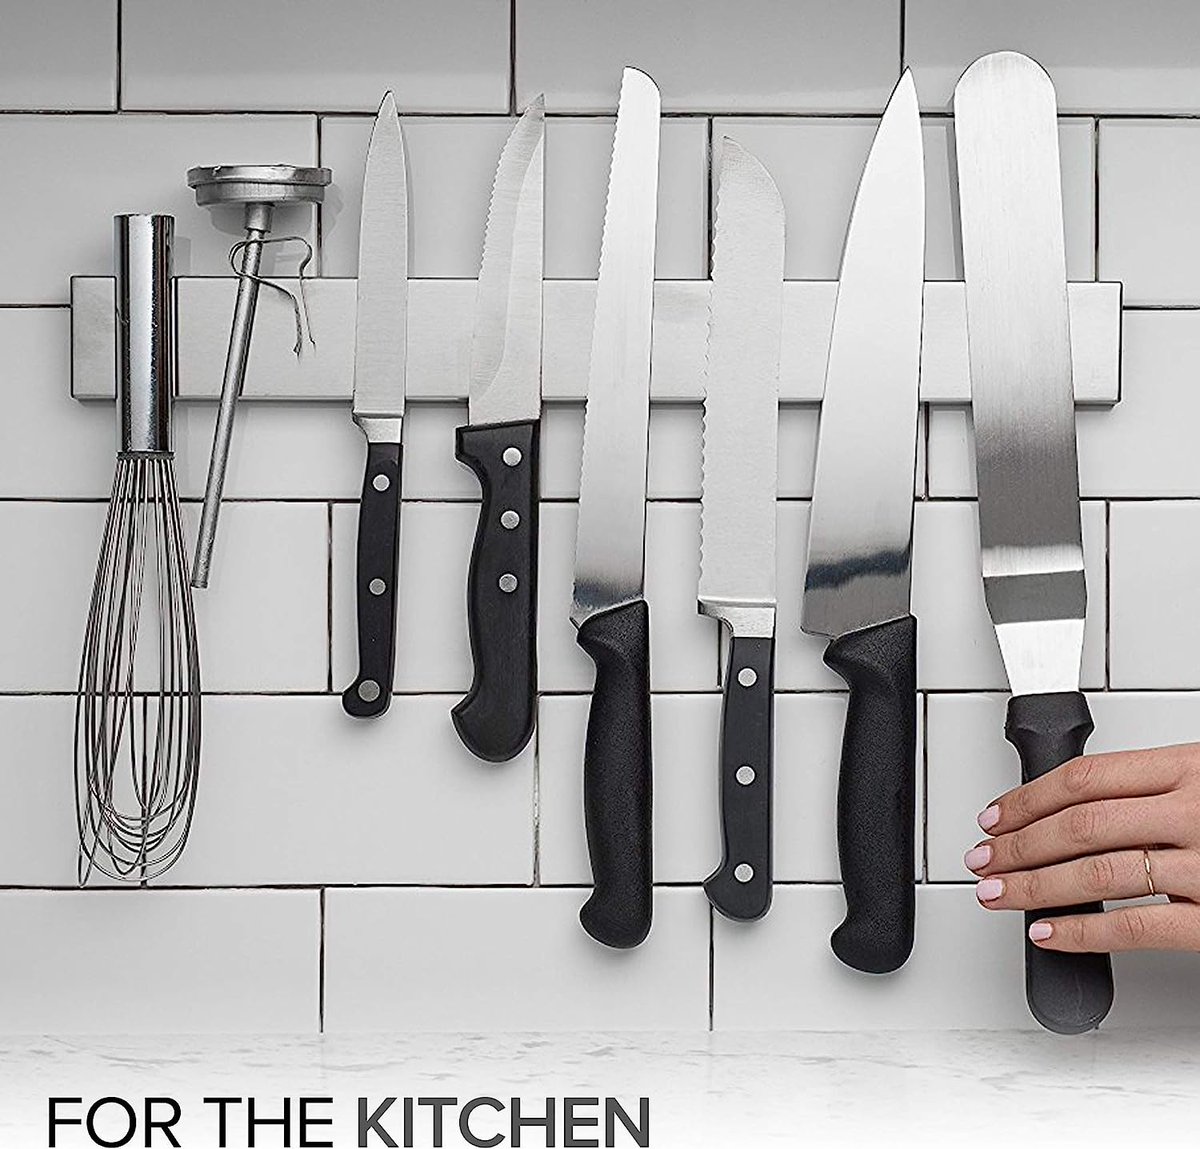 Best Kitchen Knife Holder That You Can Find On Amazon
#knifeholder #k #knife #knifehandle #knifehandlematerial #knifehandles #knifehobby #knifeholic #knifehabit #knifehit #knifehand #knifeporn #knifehits #knifehub #knifehandlematerials #knifehandlescales #knifehandlesforsale